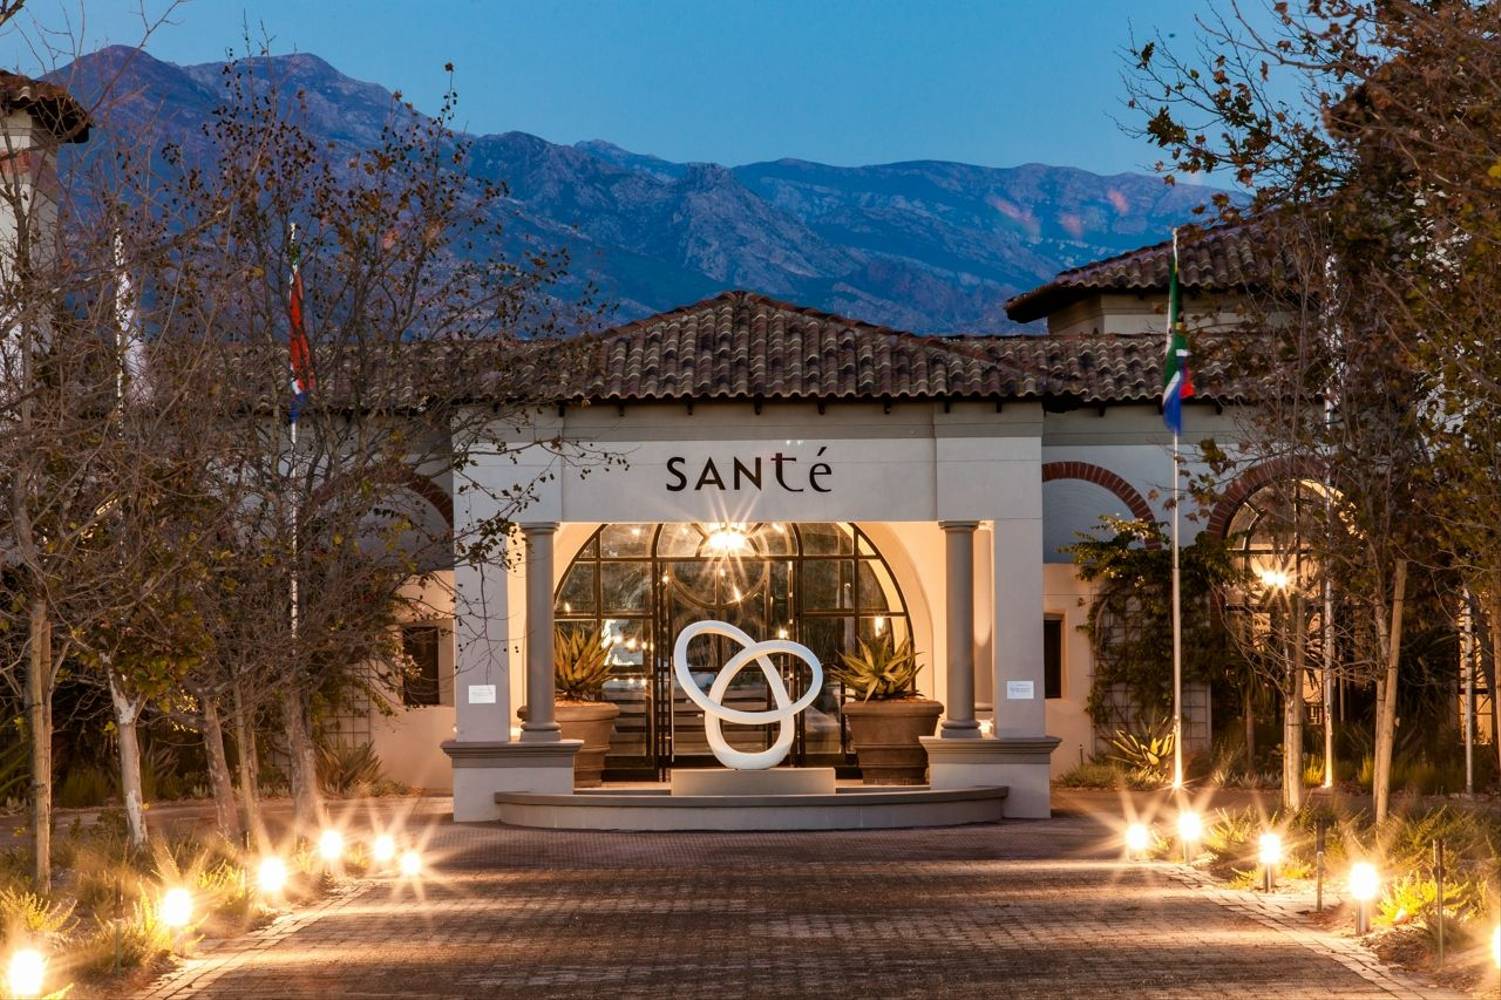 Sante Wellness Retreat and Spa frontage in South Africa